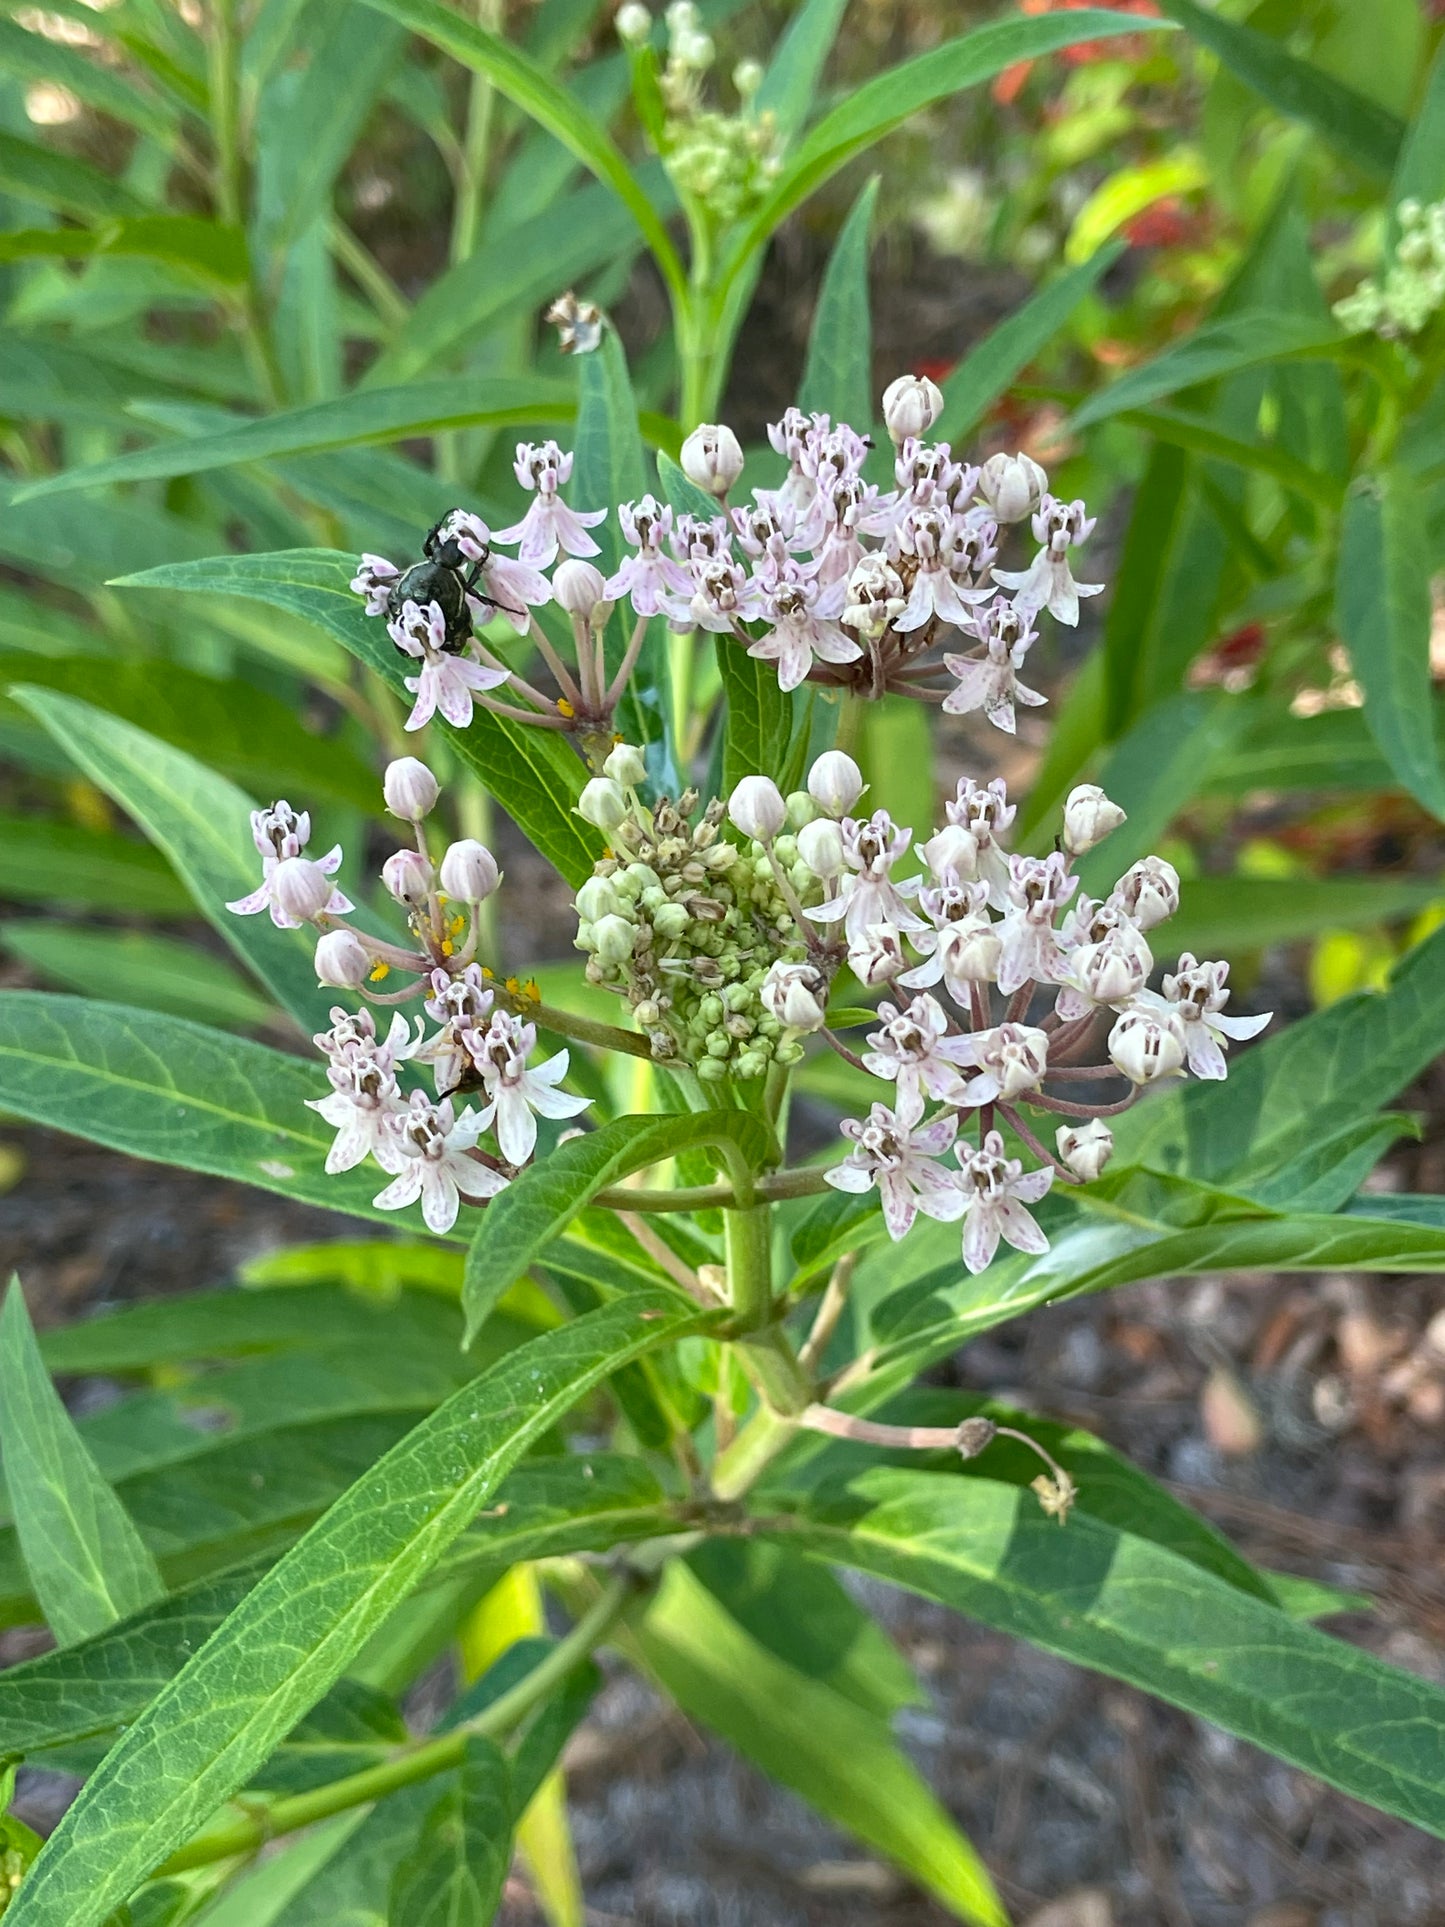 Asclepias incarnata "swamp milkweed" flowers host plant for monarch, queen, soldier butterfly